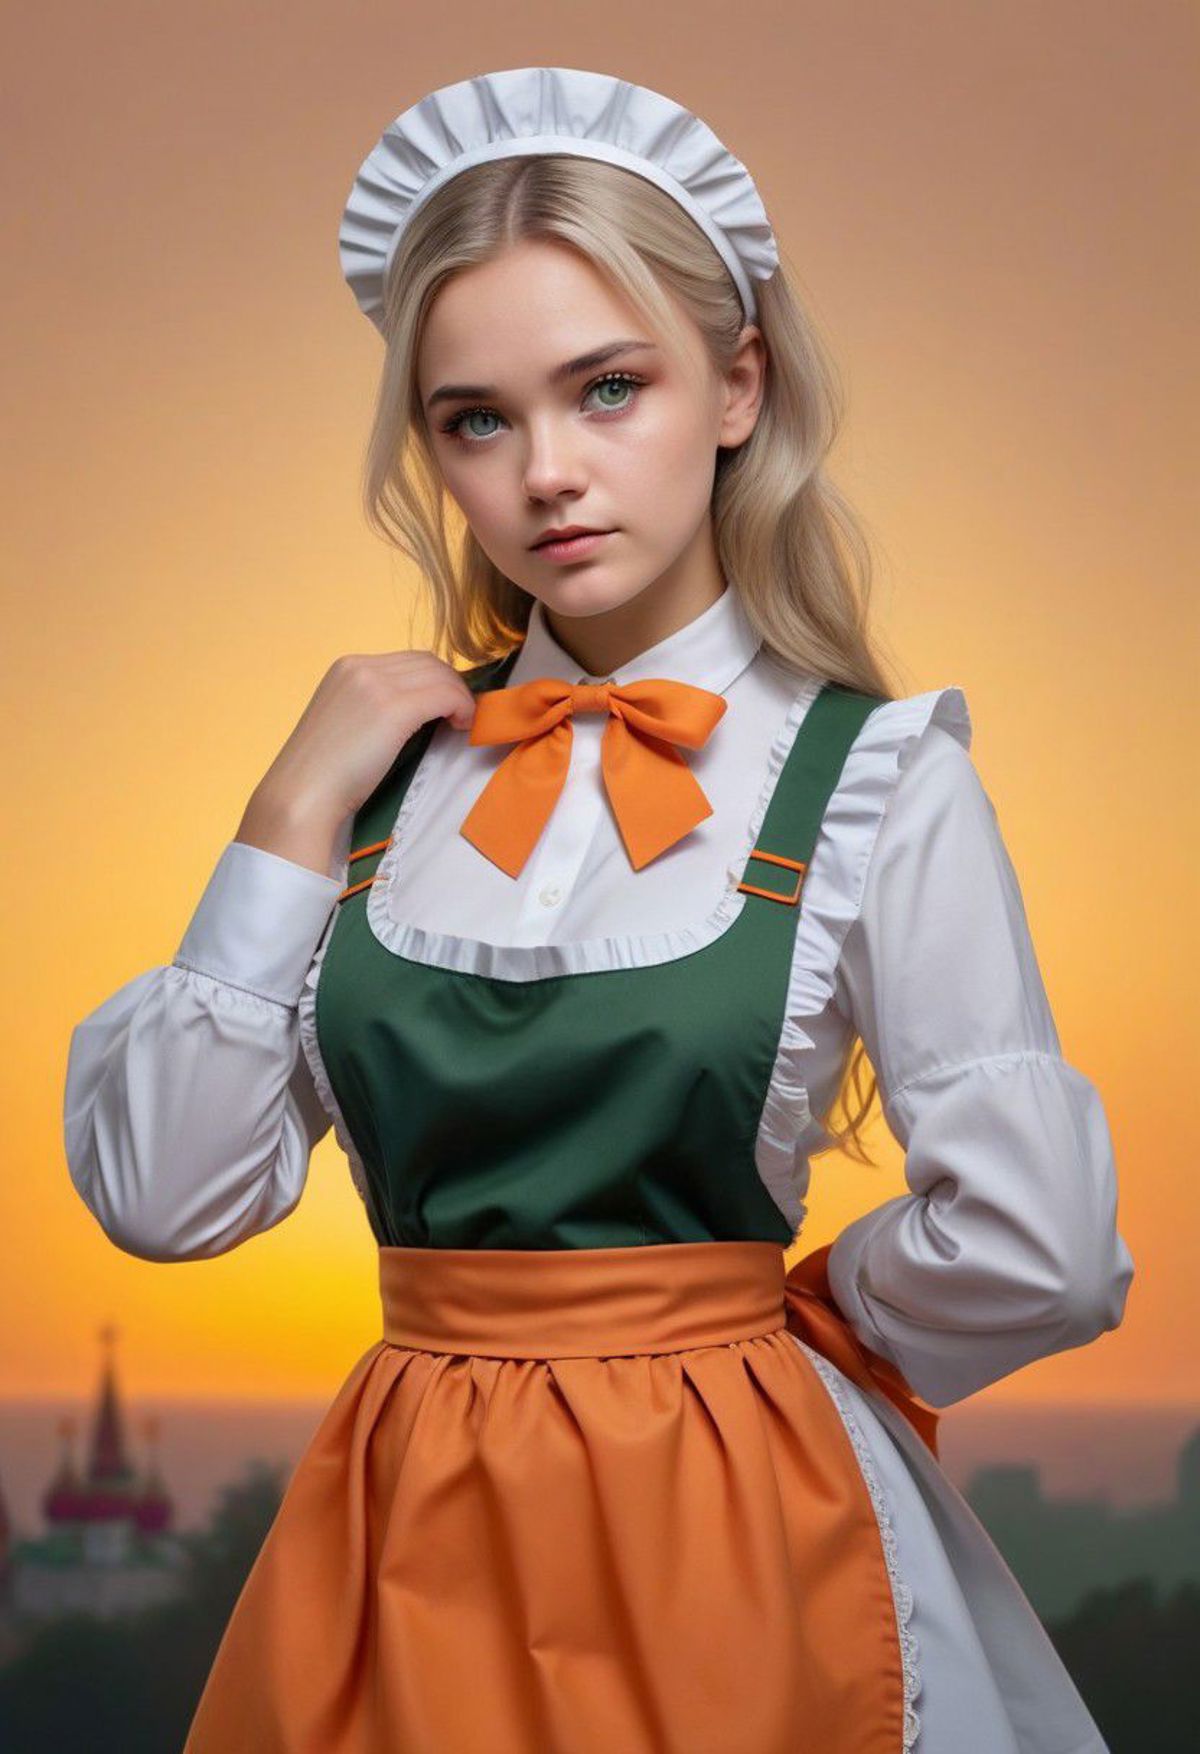 AI model image by albertmulinshtein182